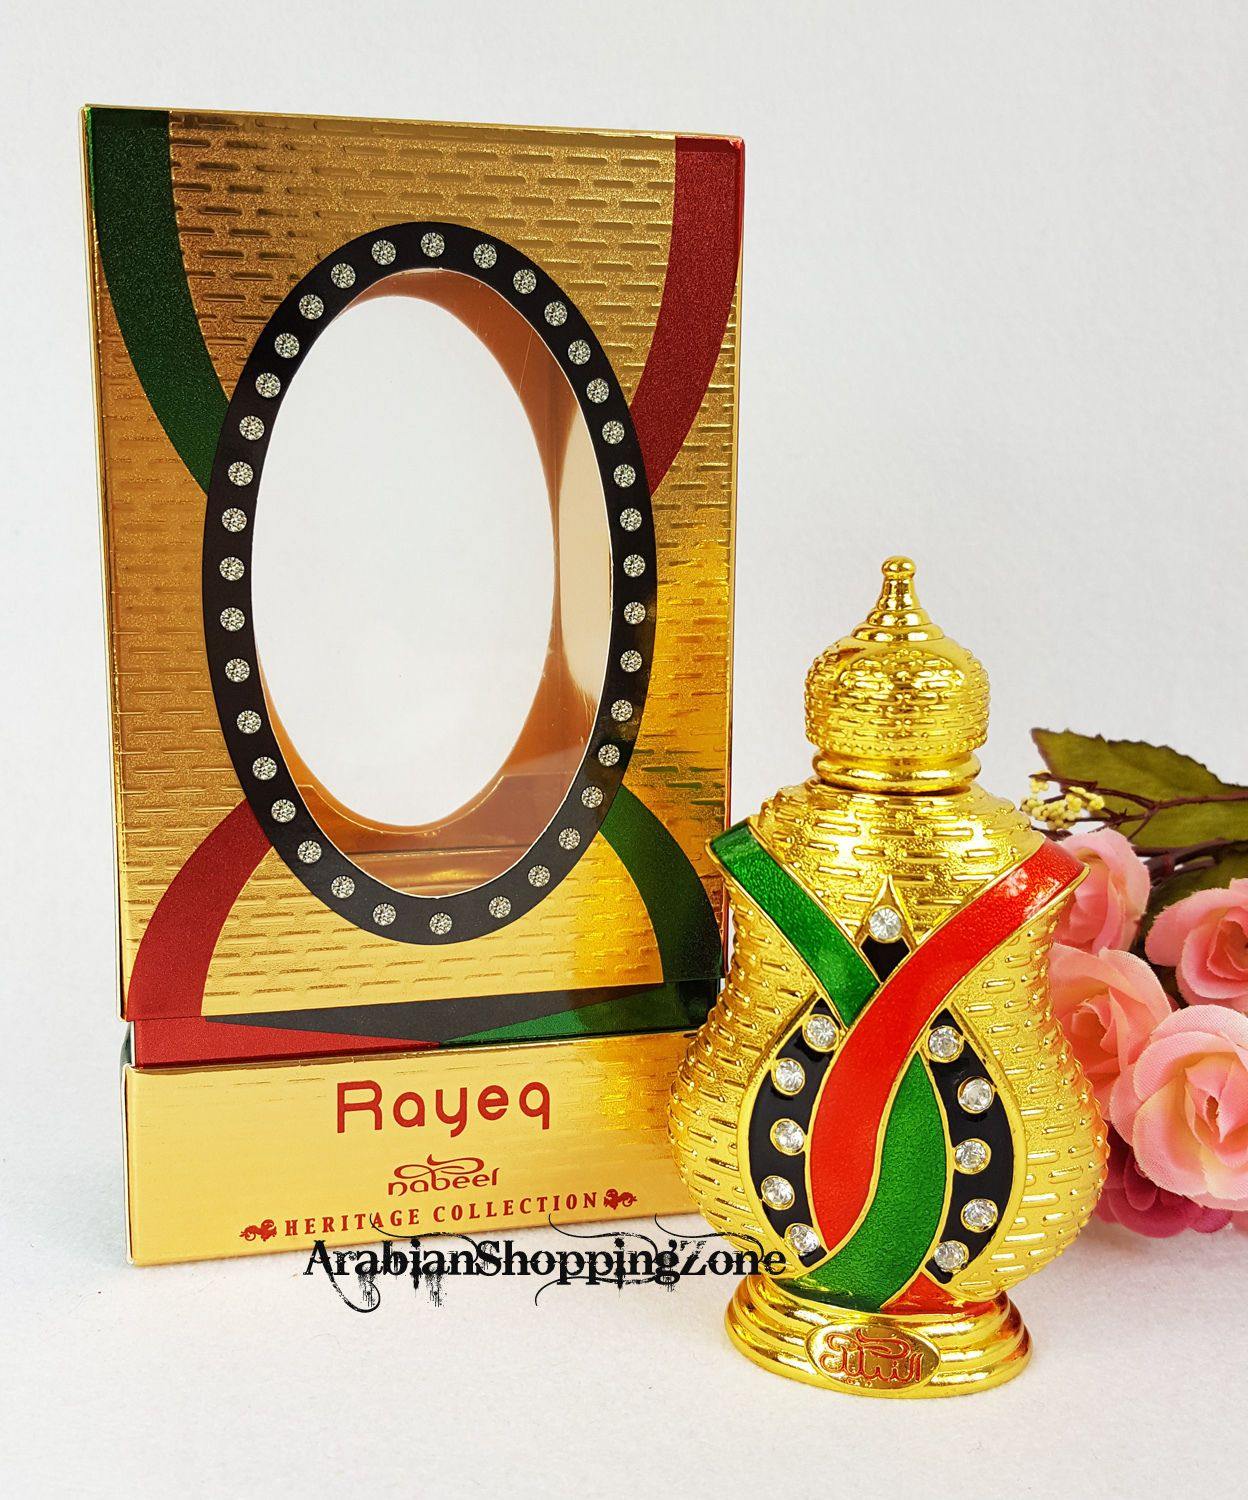 RAYEQ by Nabeel 20ml Concentrated Oil Perfume Free from Alcohol - Arabian Shopping Zone